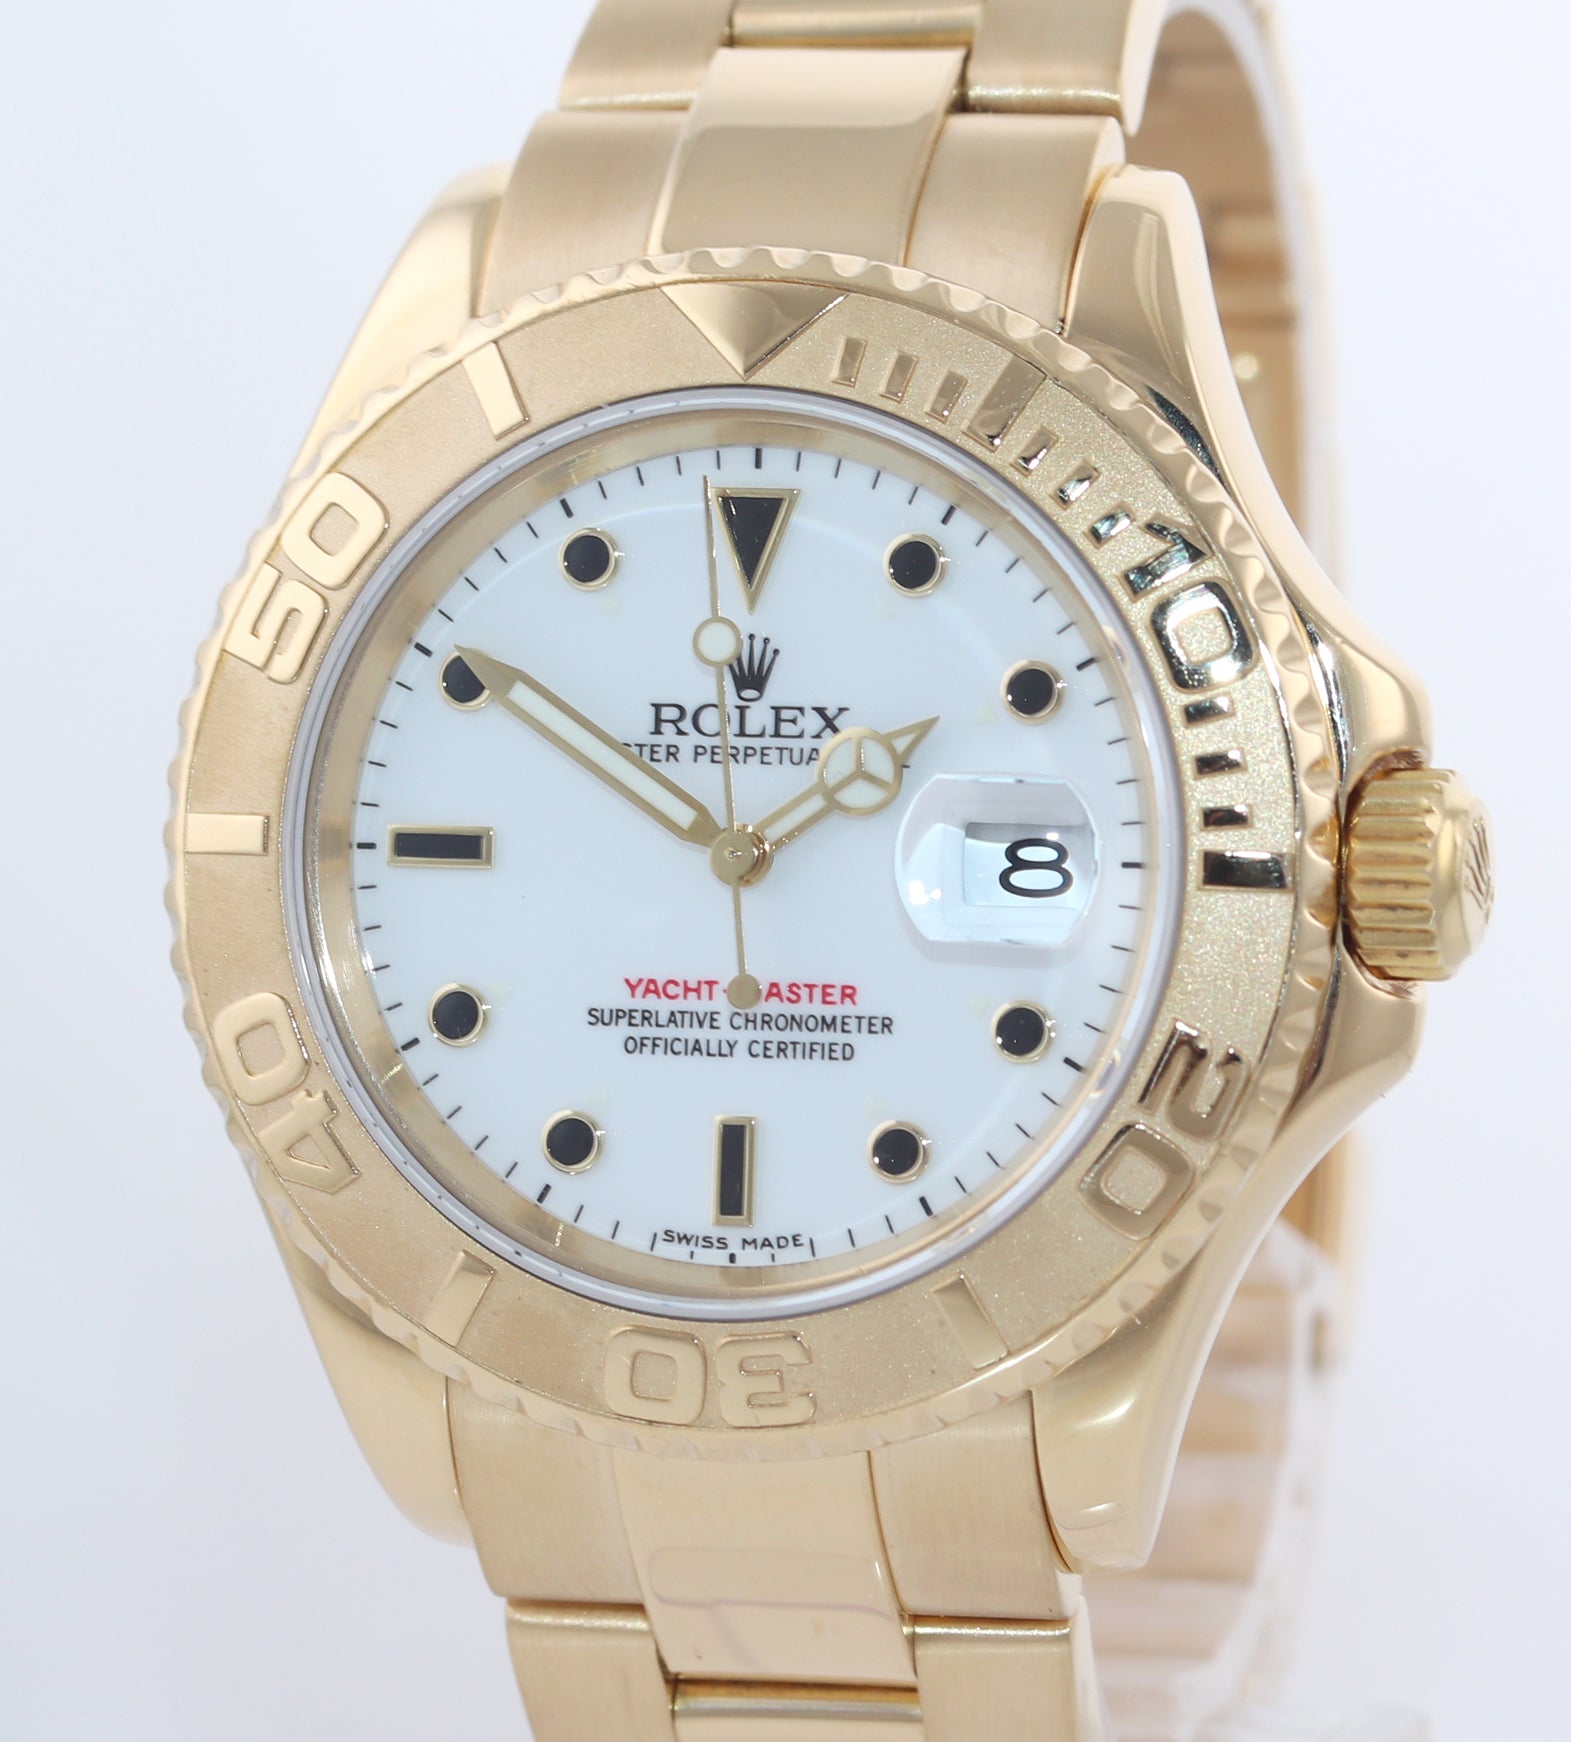 PAPERS 2005 MINT Rolex Yacht-Master 18k Yellow Gold White Dial 16628 40mm Watch